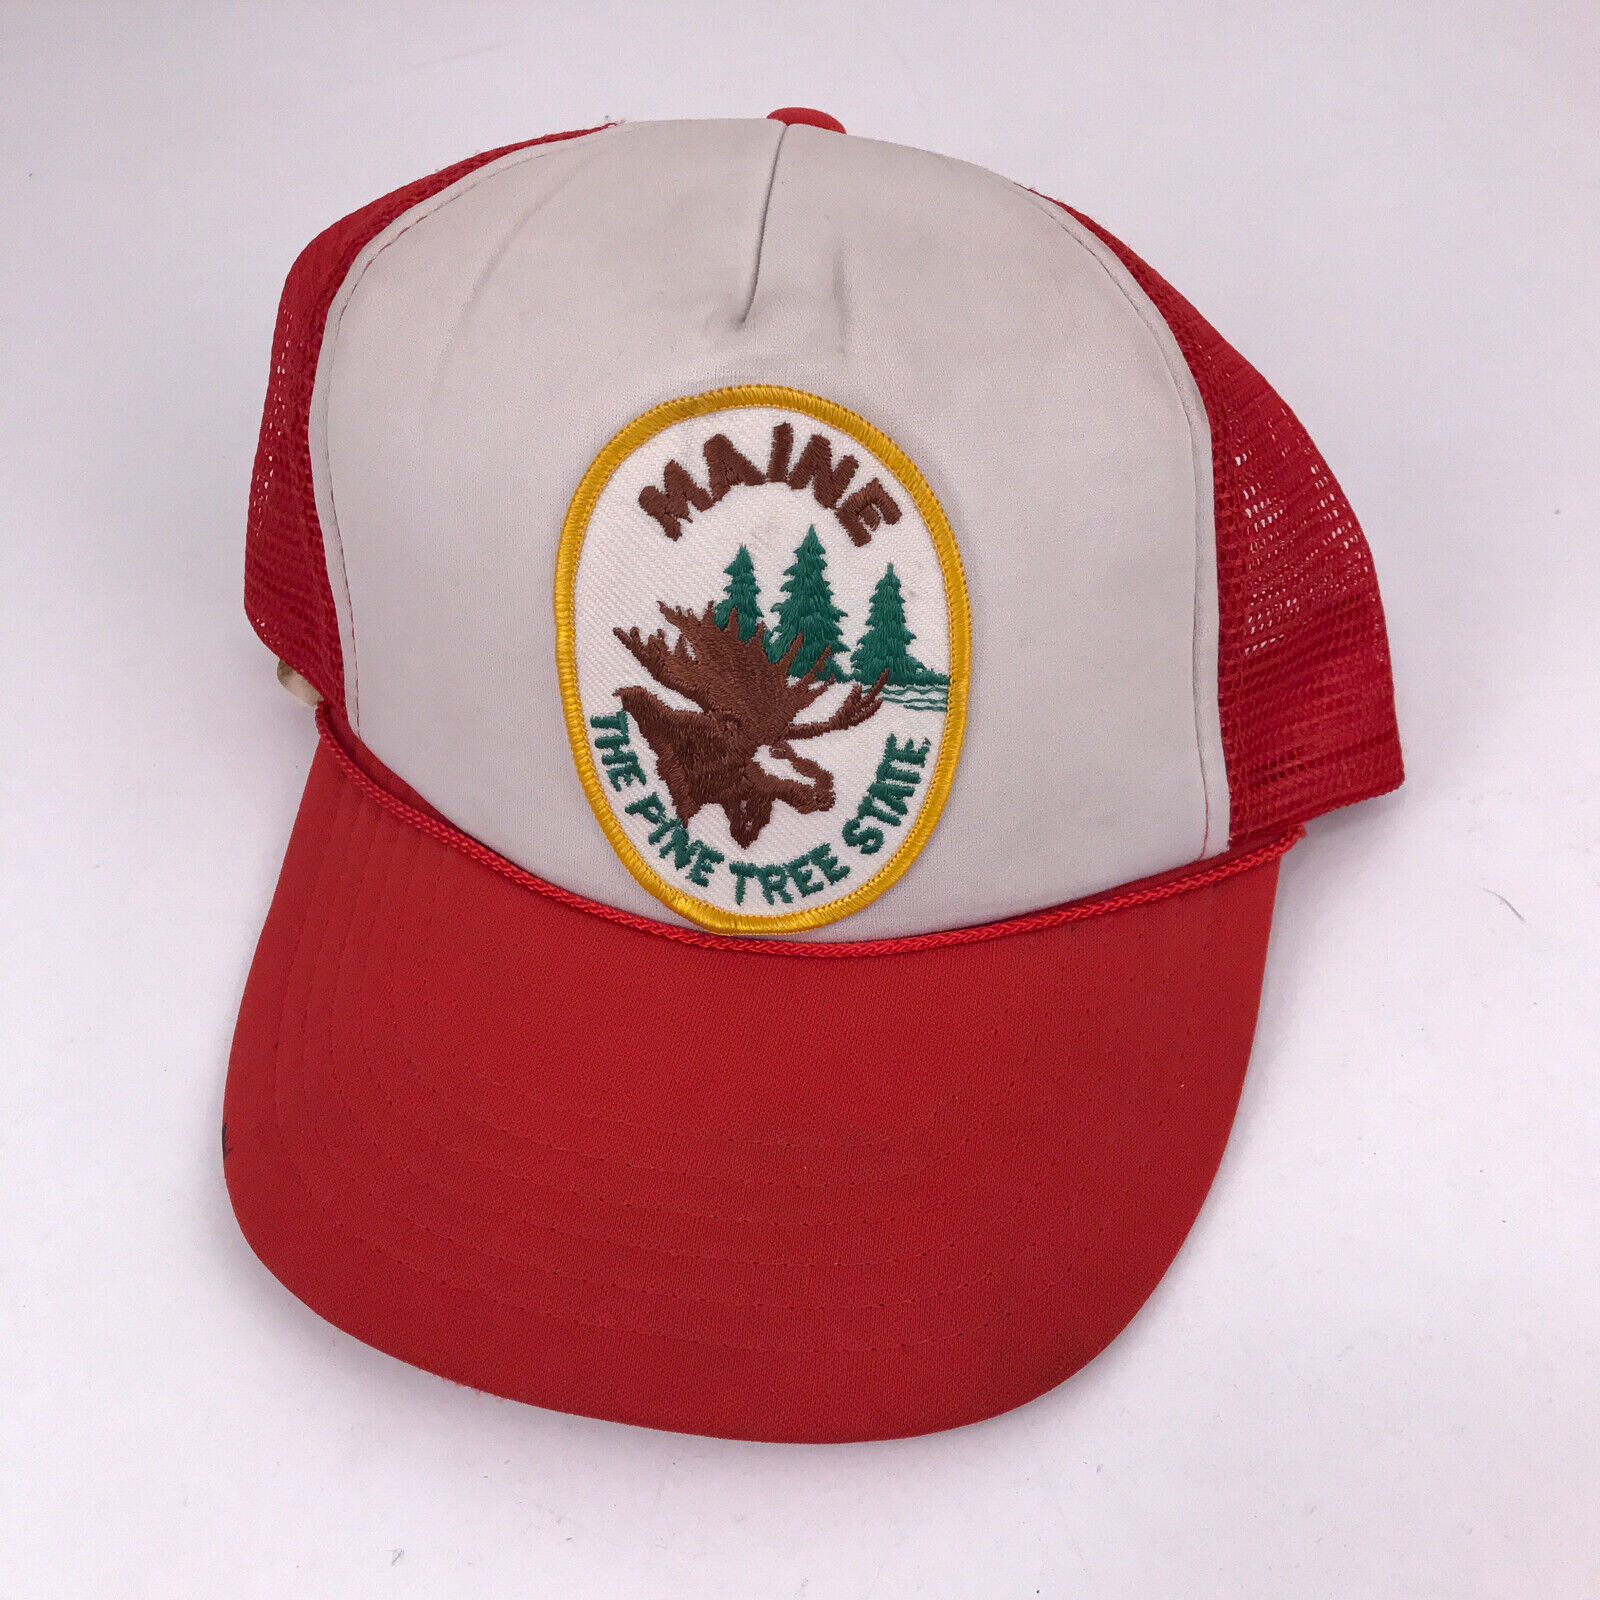 Vintage Maine patch hat trucker cap Nanco brand red The Pine Tree State